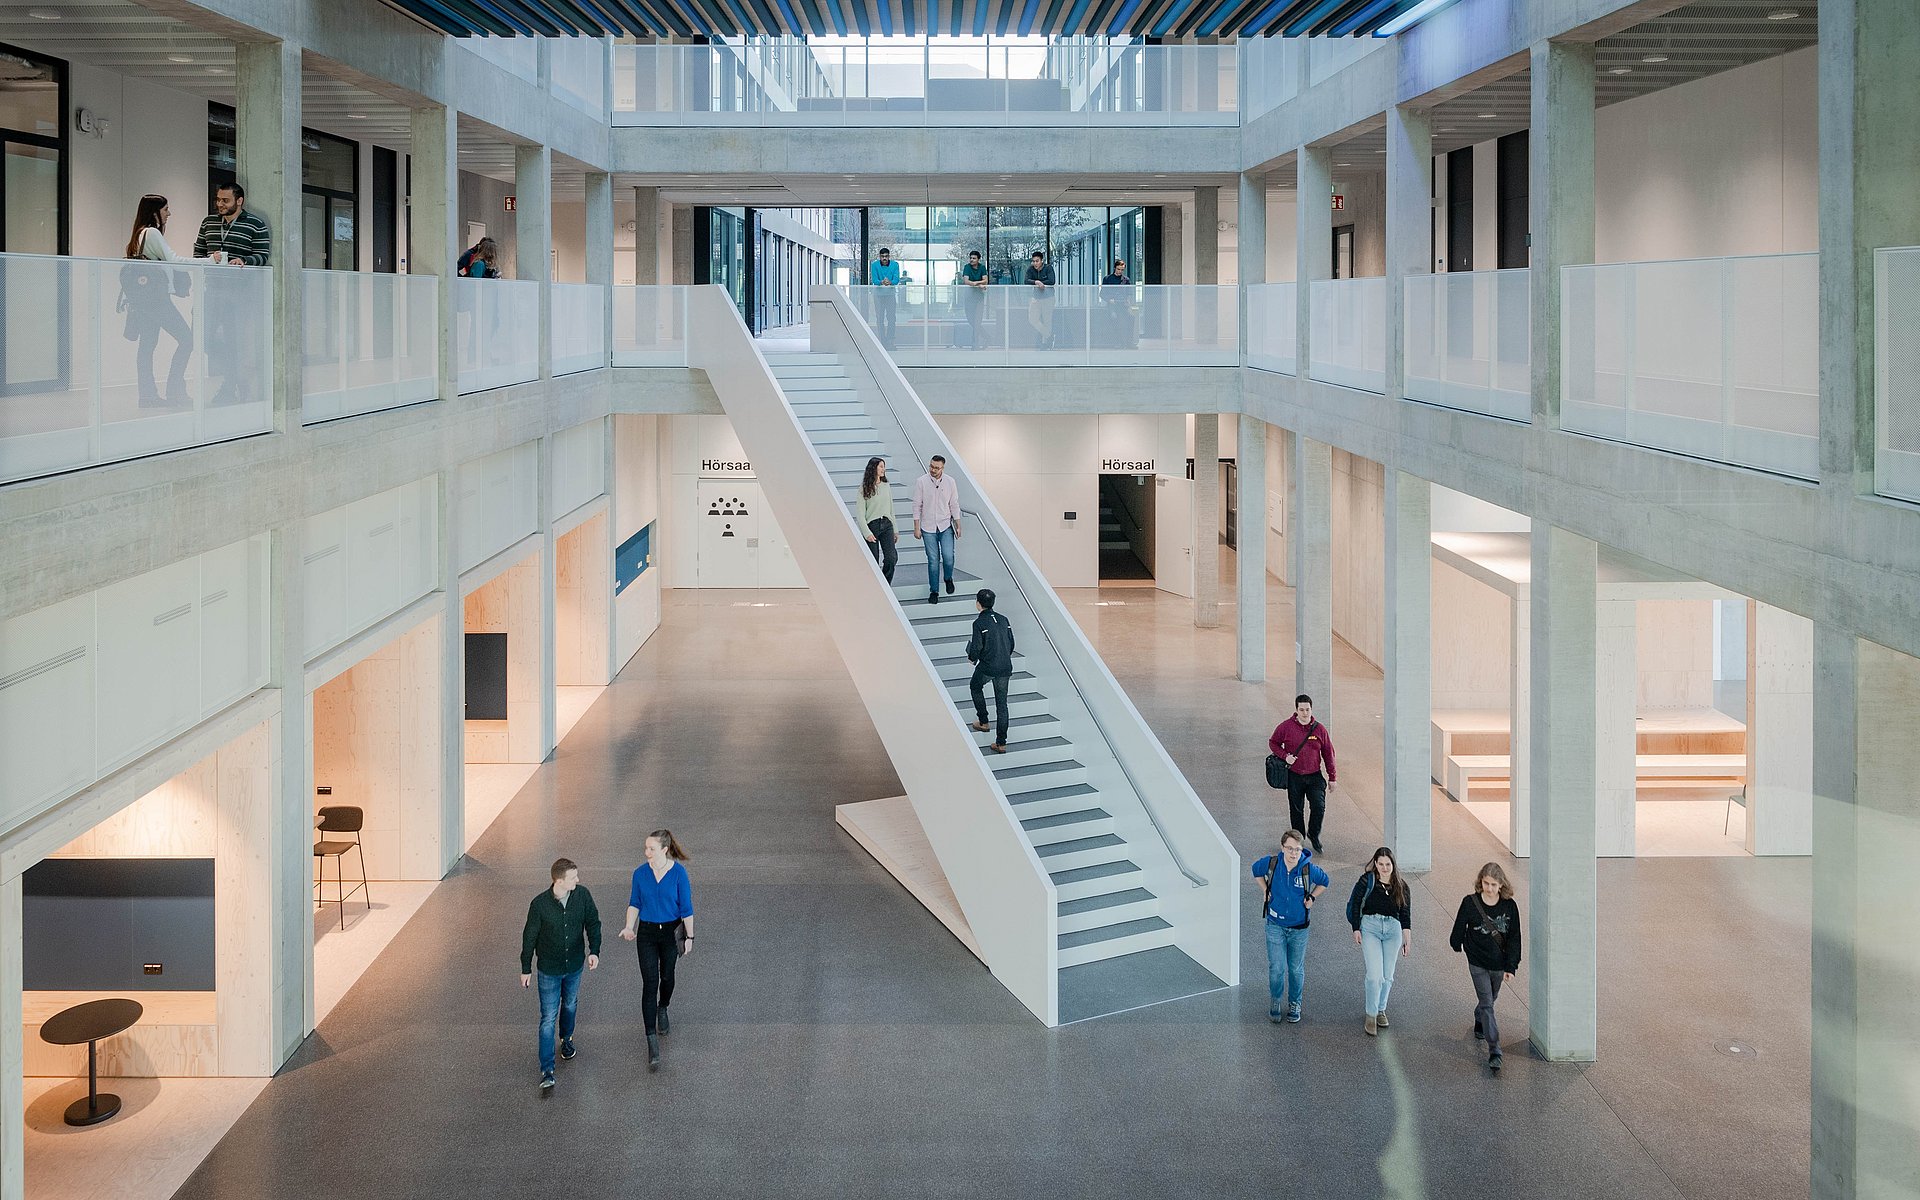 Students walking through the entrance hall of the newly finished building for the TUM Department of Electrical and Computer Engineering on the Garching campus (Image: Andreas Heddergott / TUM).